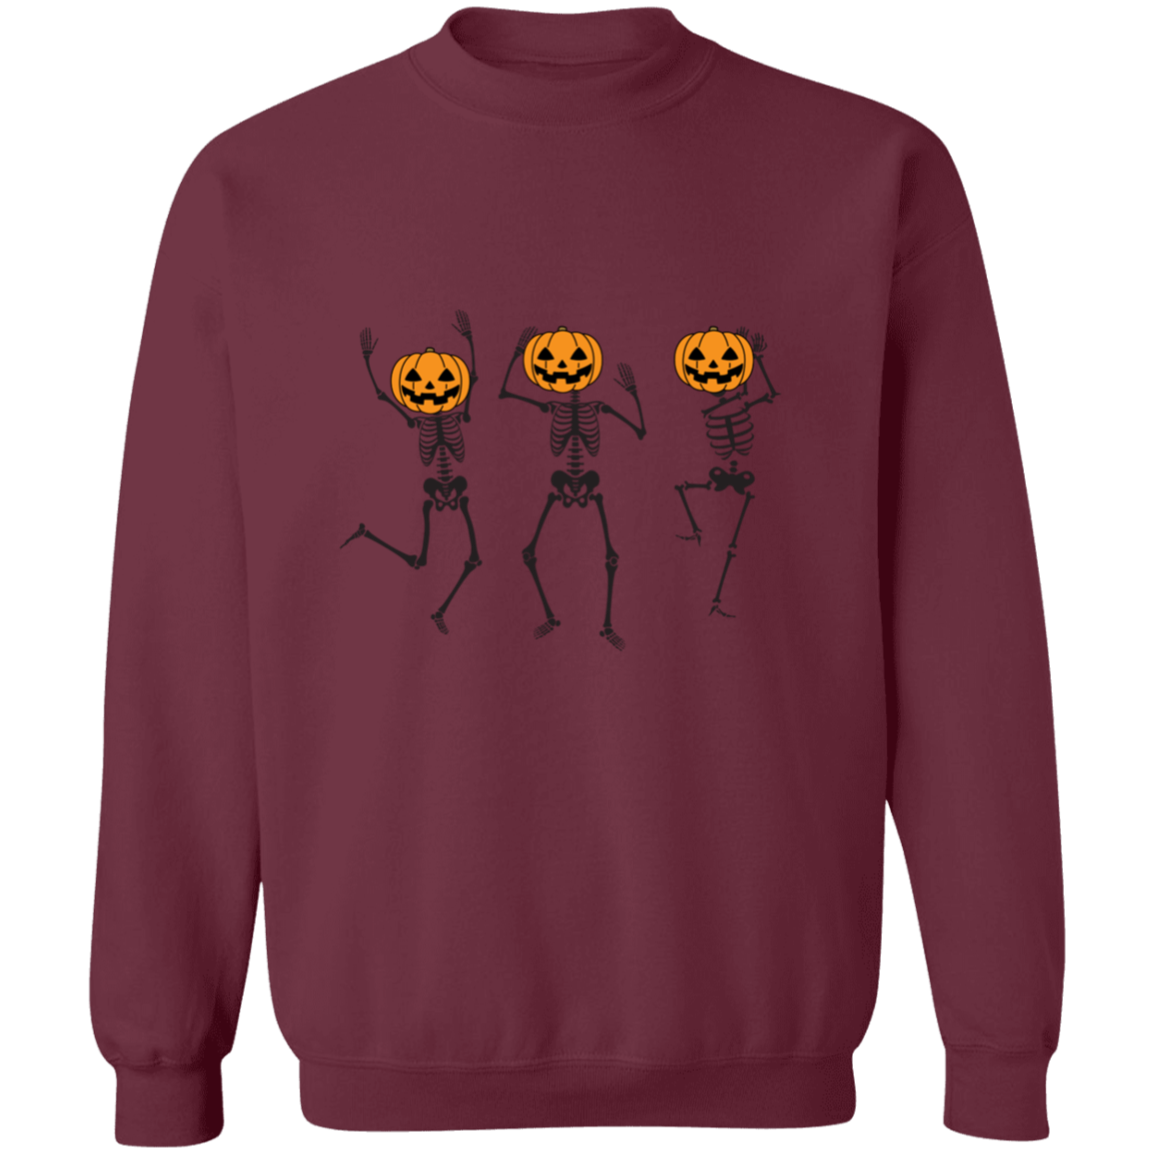 Get trendy with Dancing Skeletons Crewneck Pullover Sweatshirt - Sweatshirts available at Good Gift Company. Grab yours for $30 today!